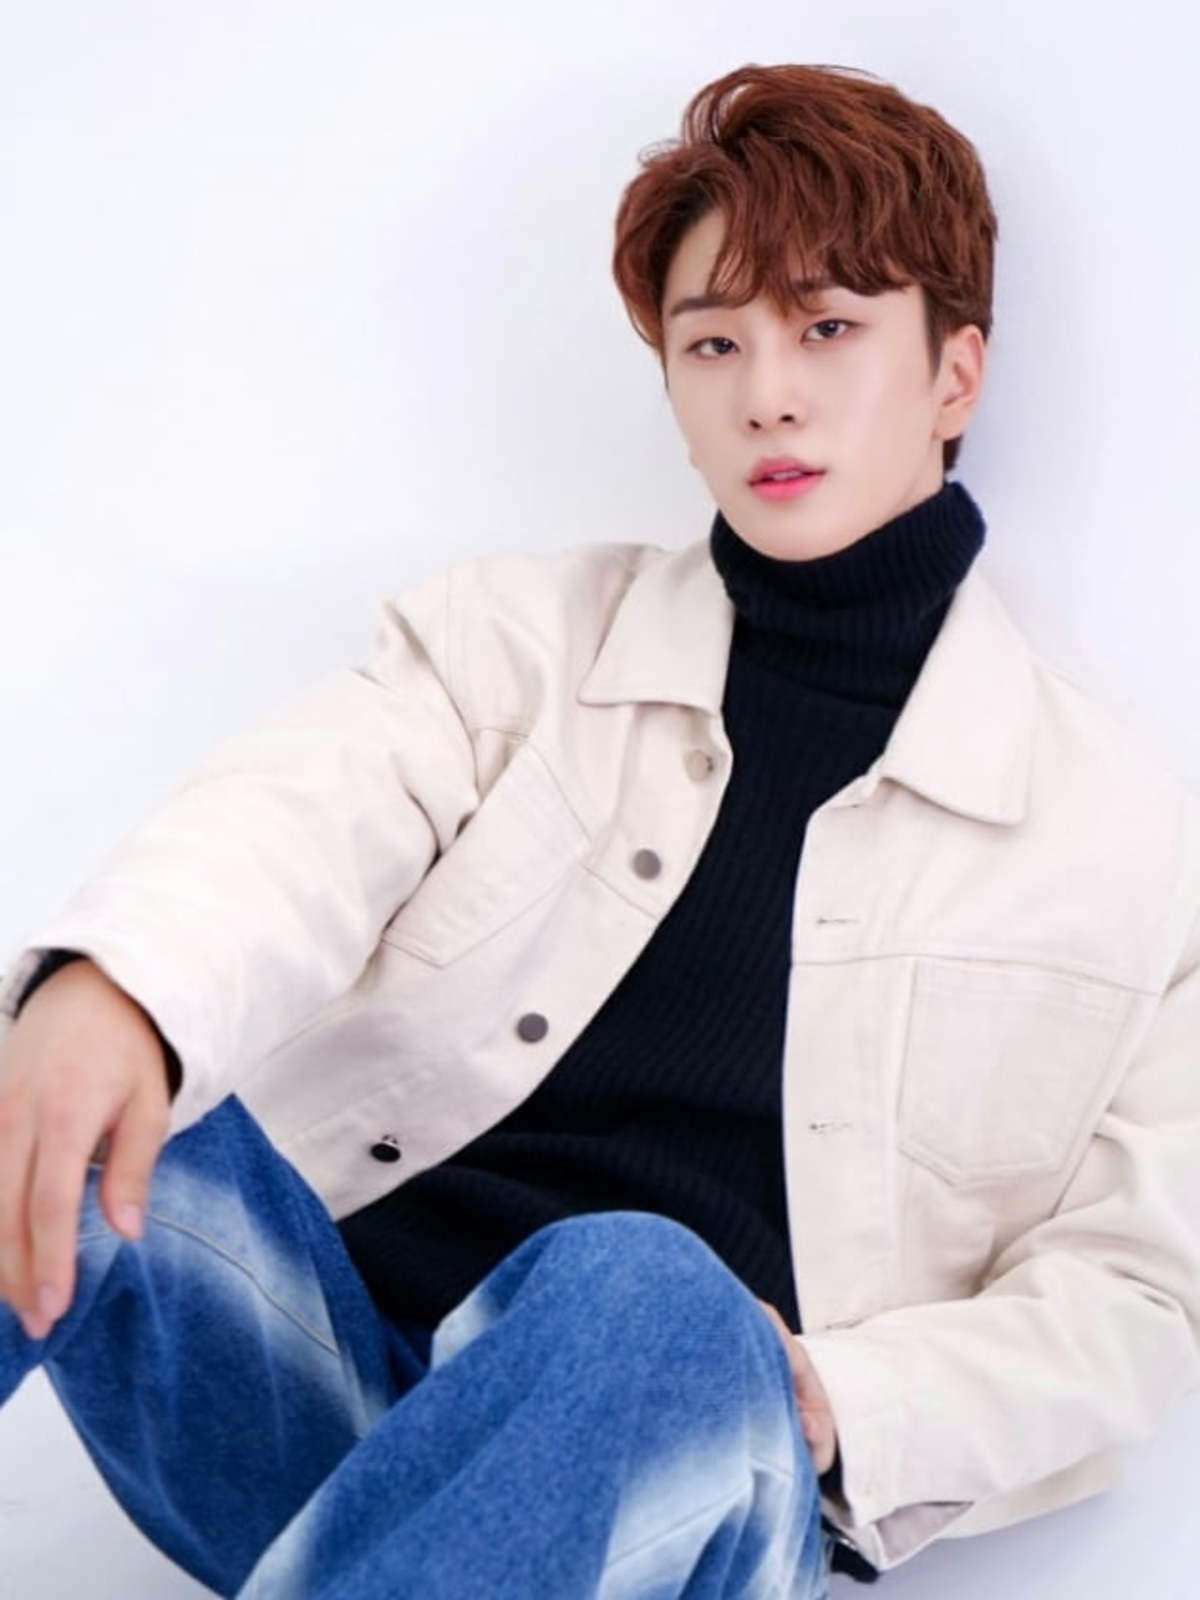 newkidd-jin-kwon-confirms-to-star-in-new-bl-web-drama-to-my-star